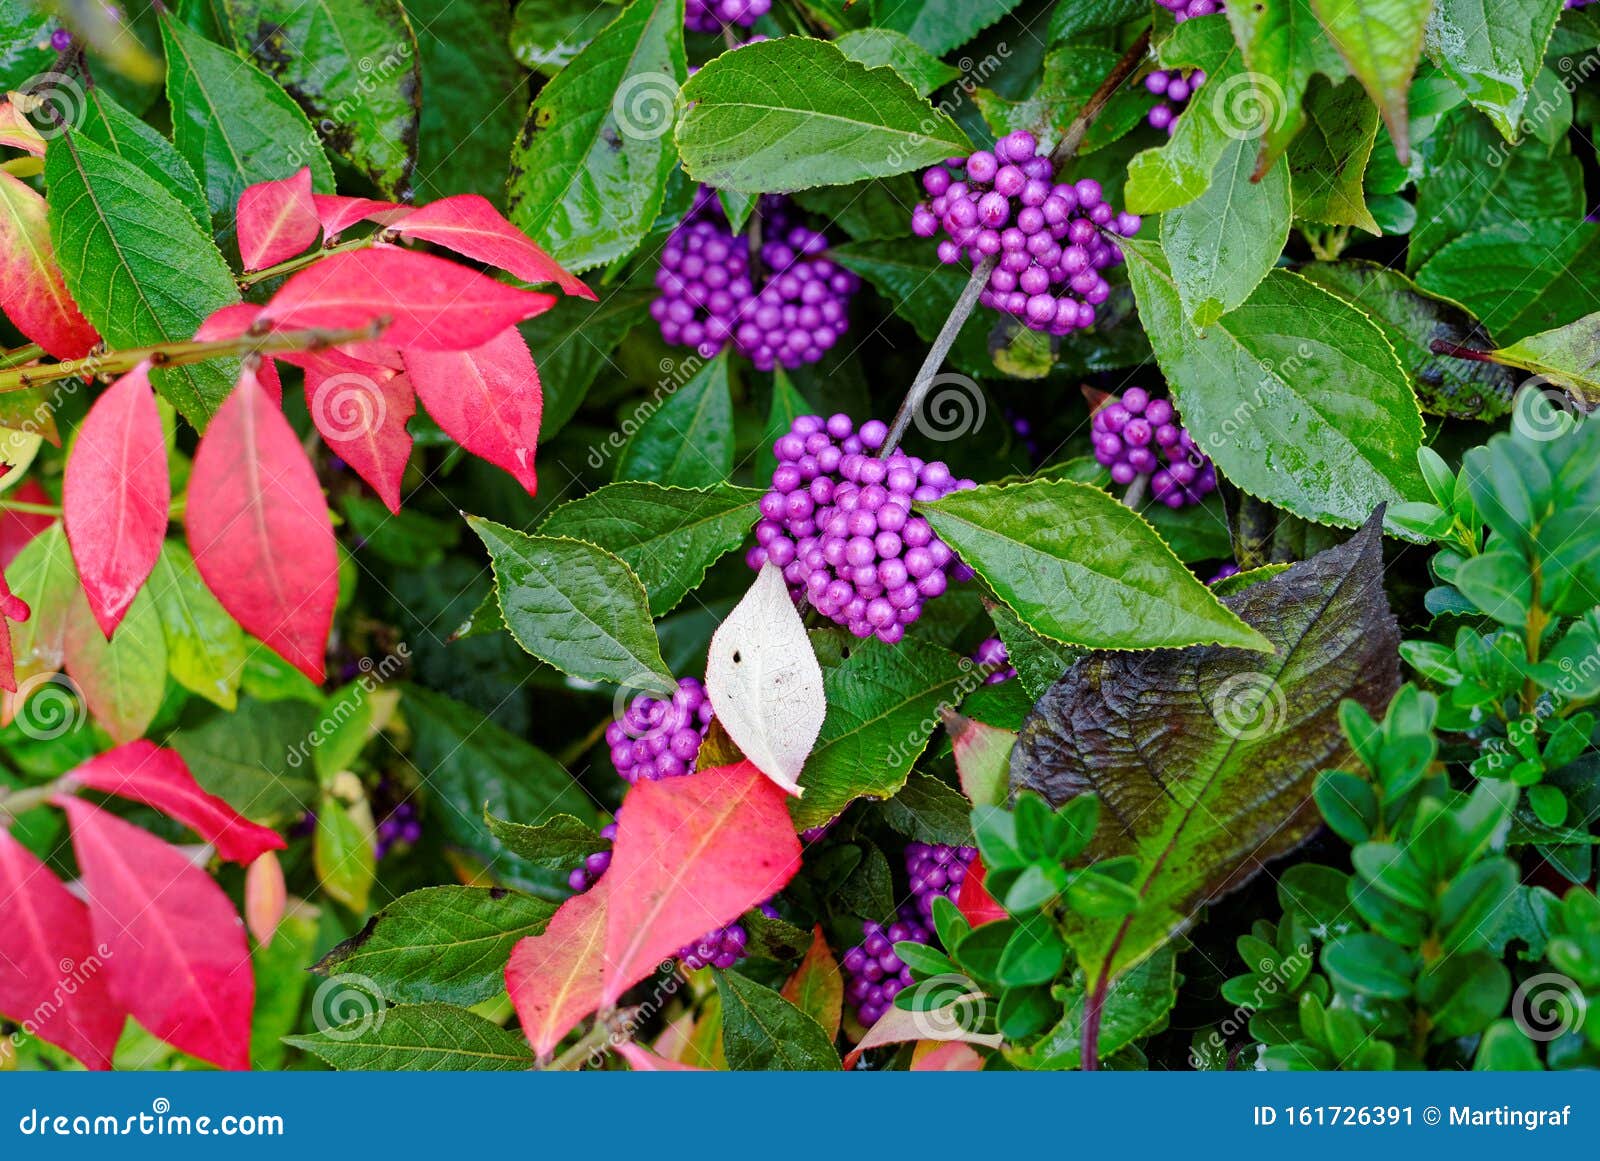 beautyberry shrub with clusters of purple berries autumnal colors